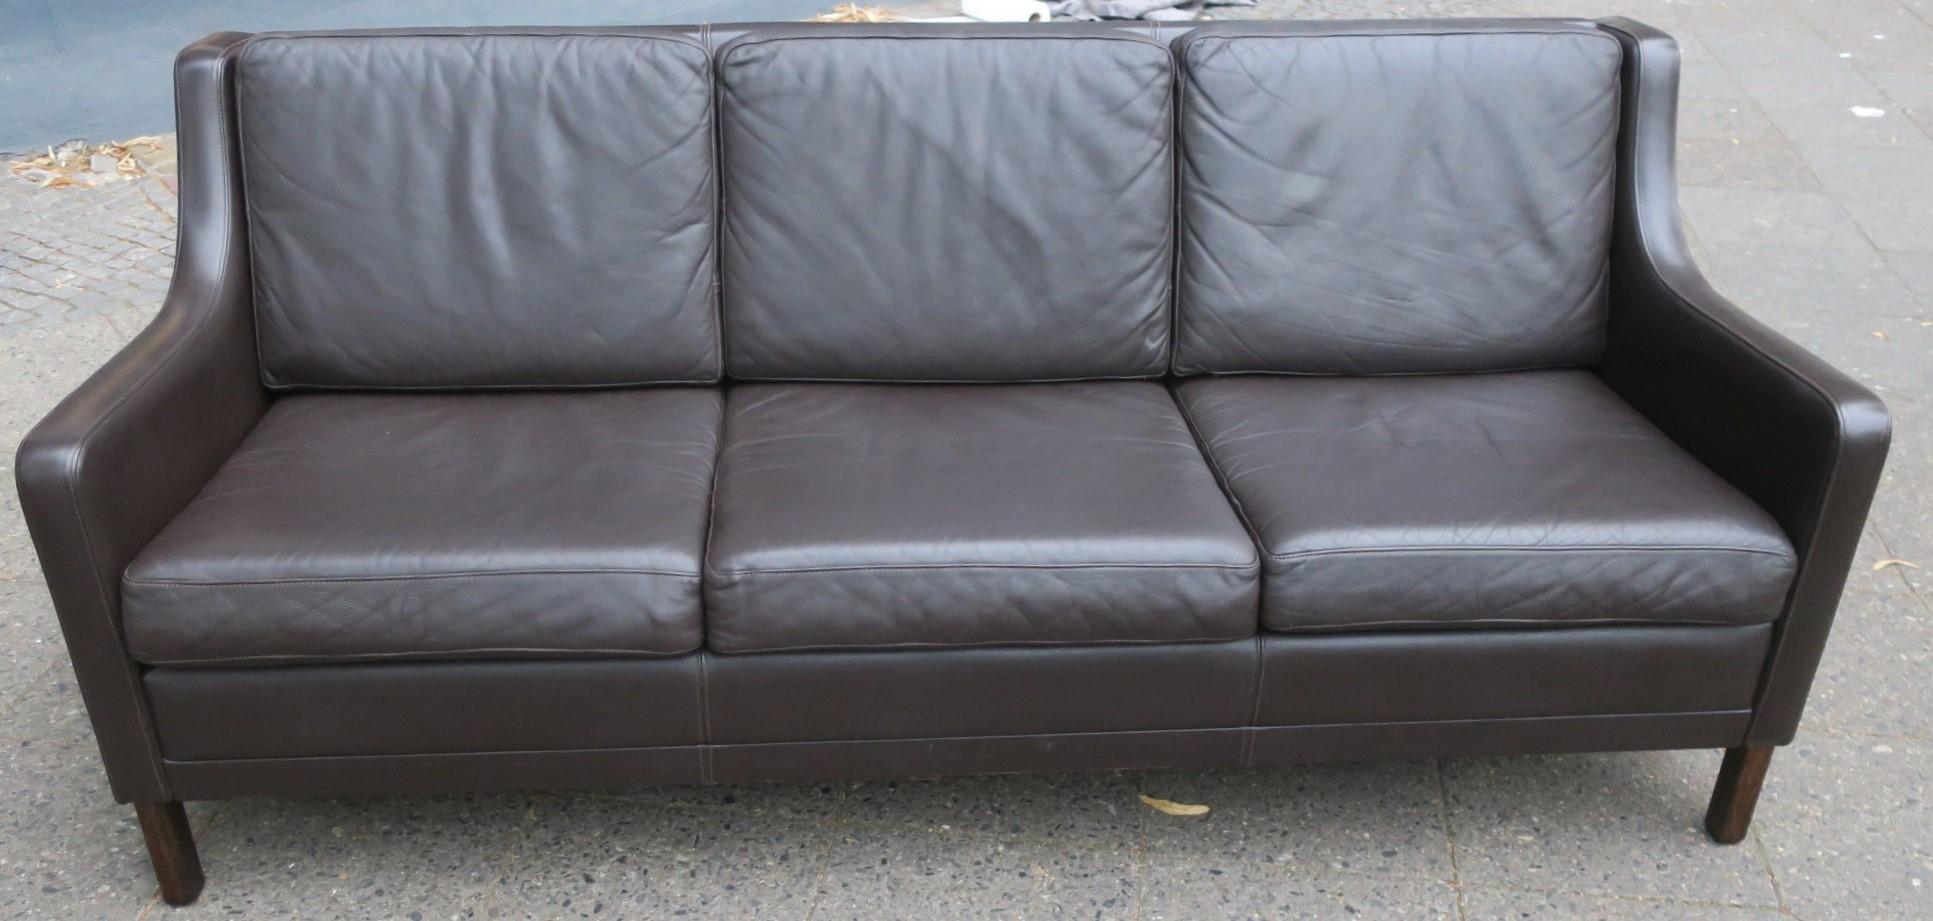 Midcentury Danish sofa in dark brown leather, finely made, 1960s.
  